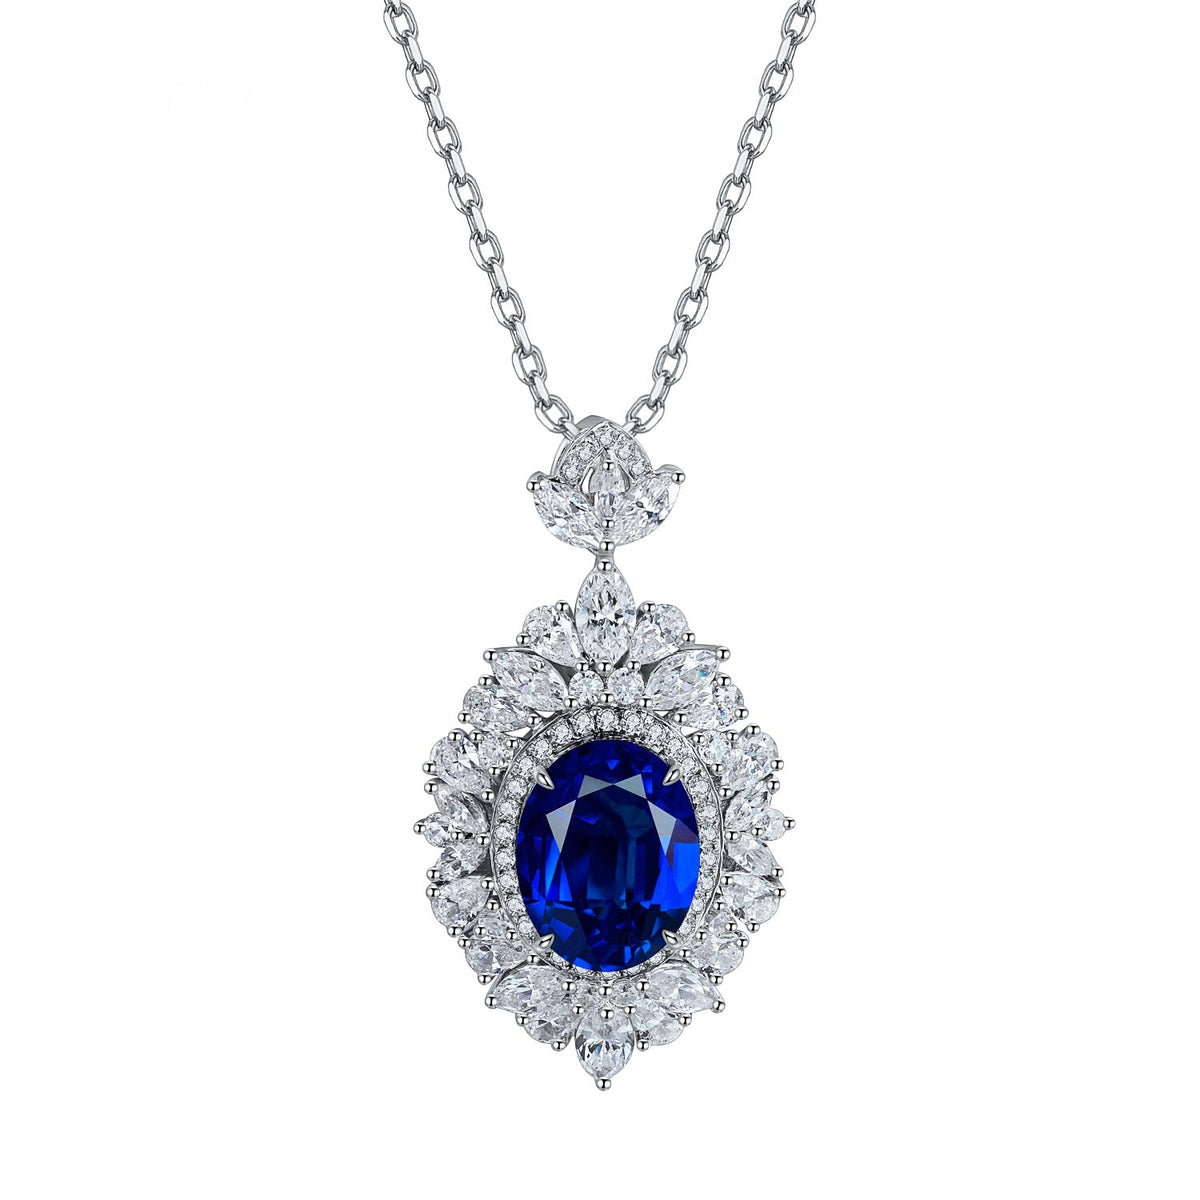 Etoilier Lab Created Sapphire Necklace, 925 Sterling Silver Pendant Oval Cut